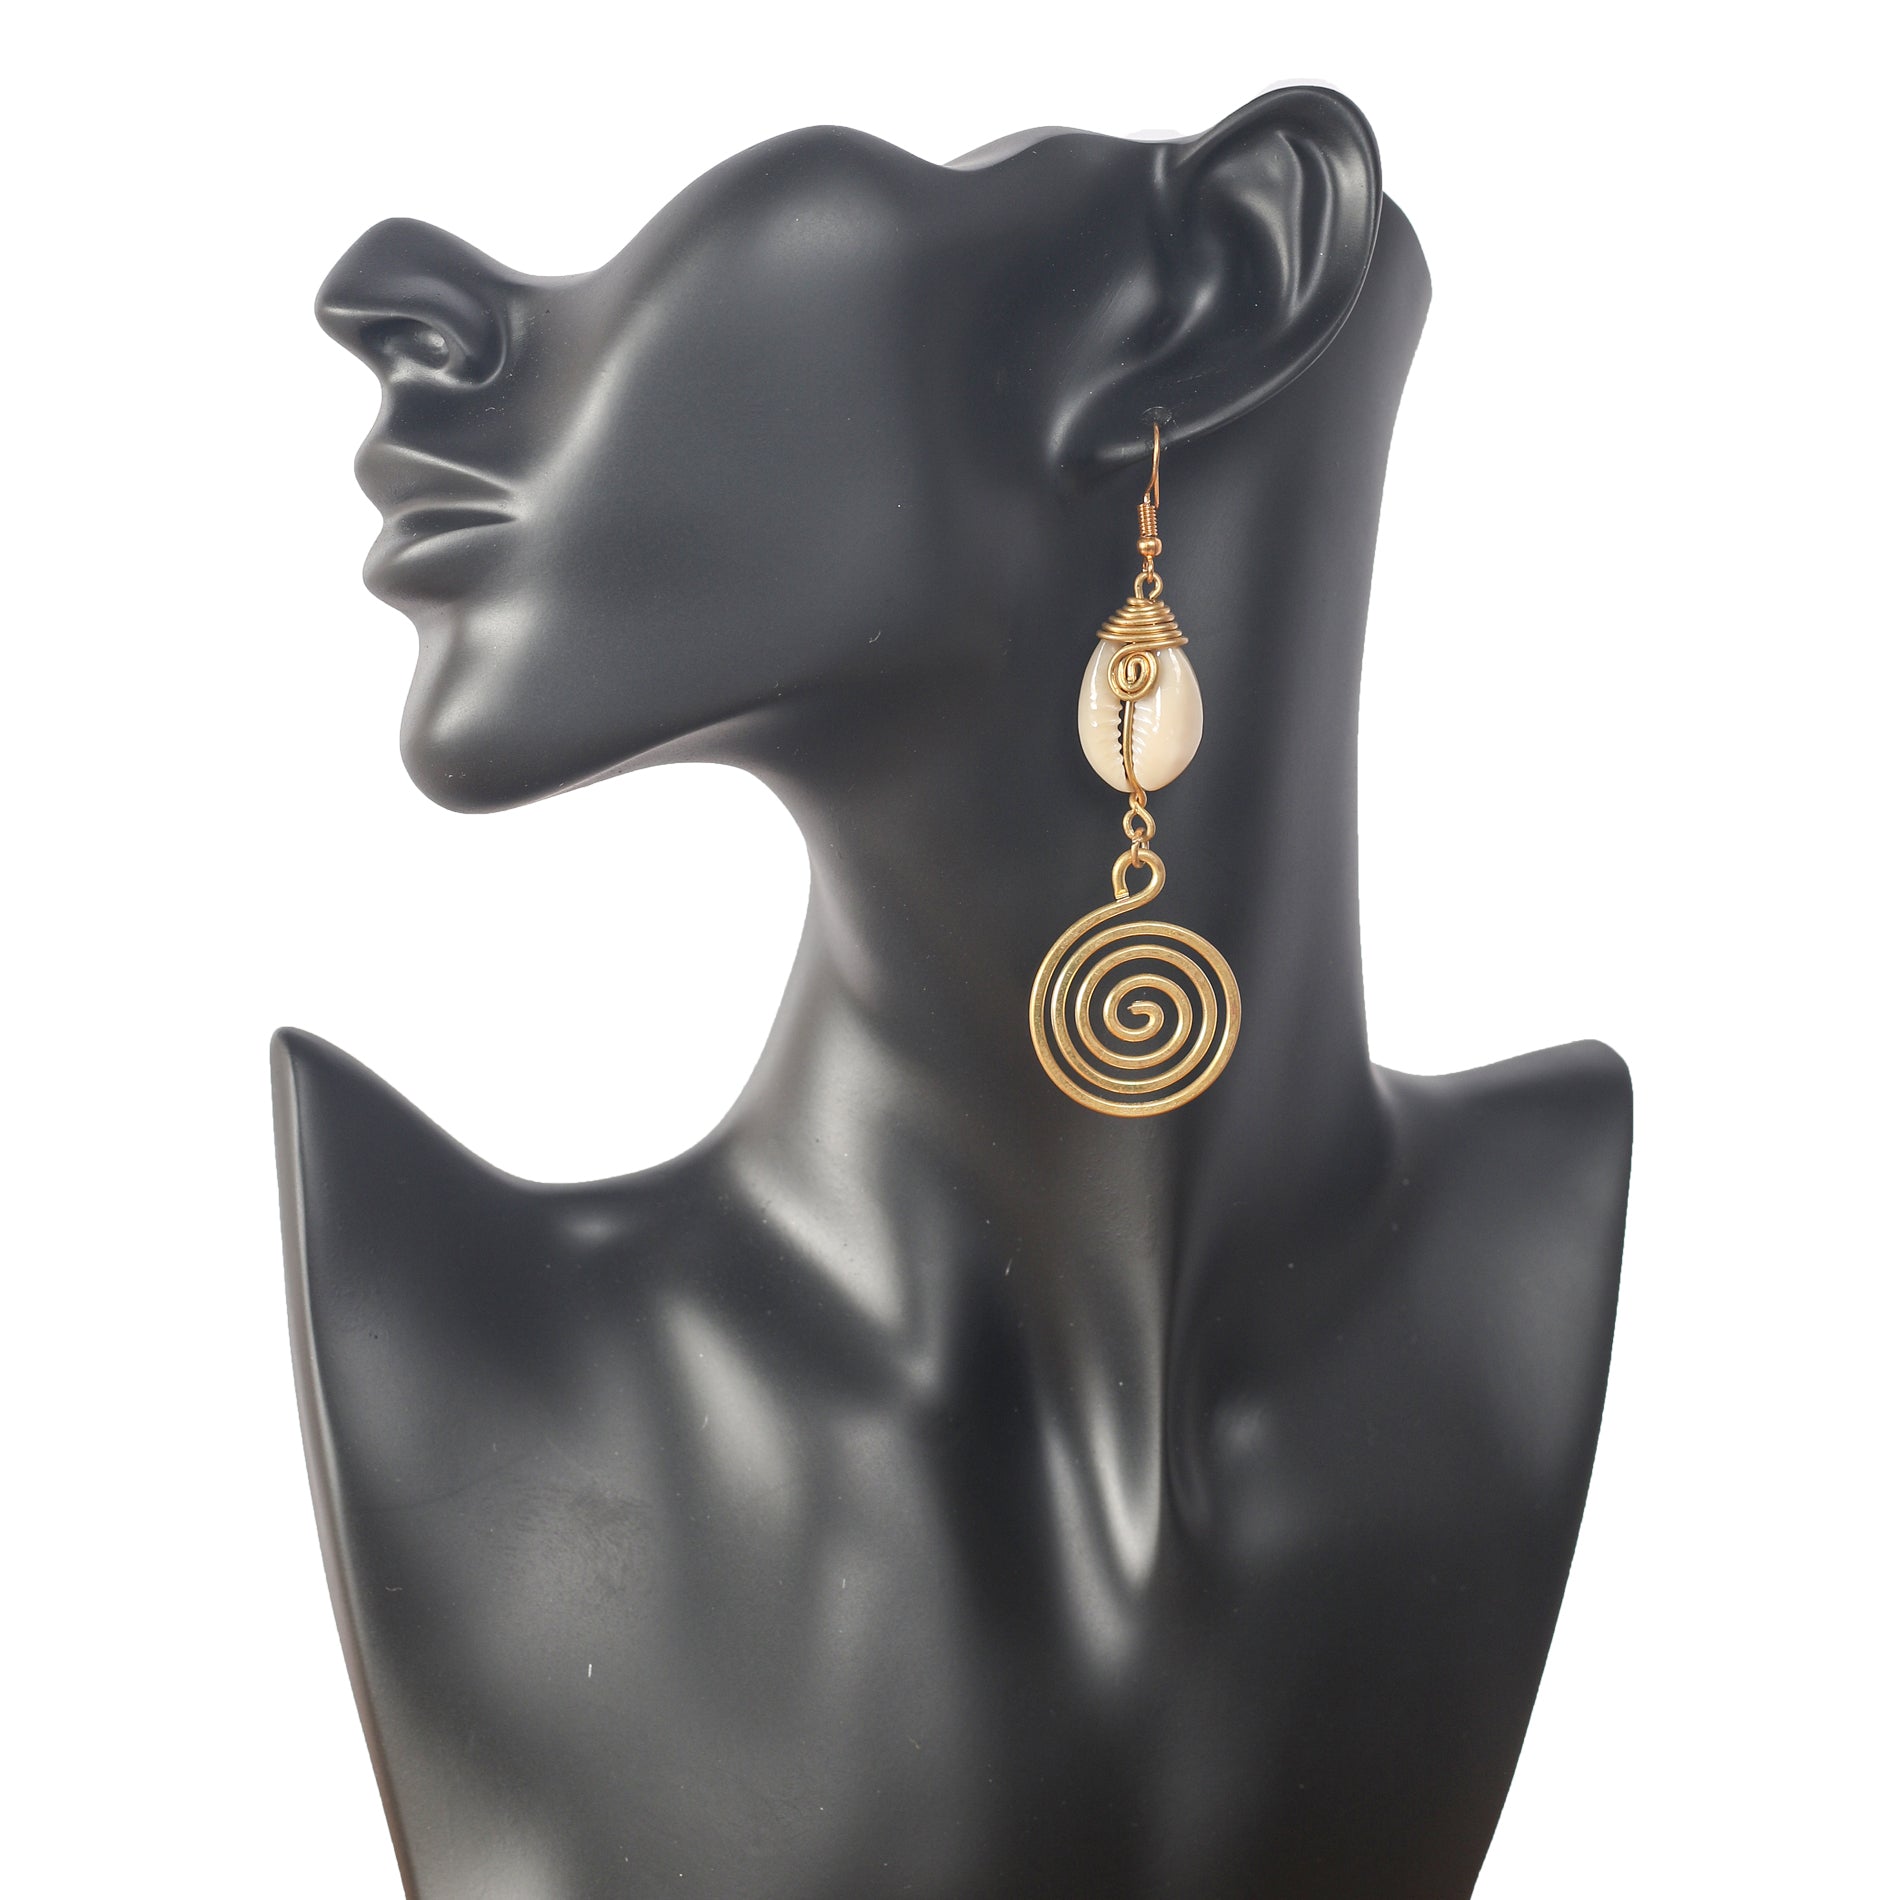 Spiral Earrings handmade with gold plated brass and cowrie shell.